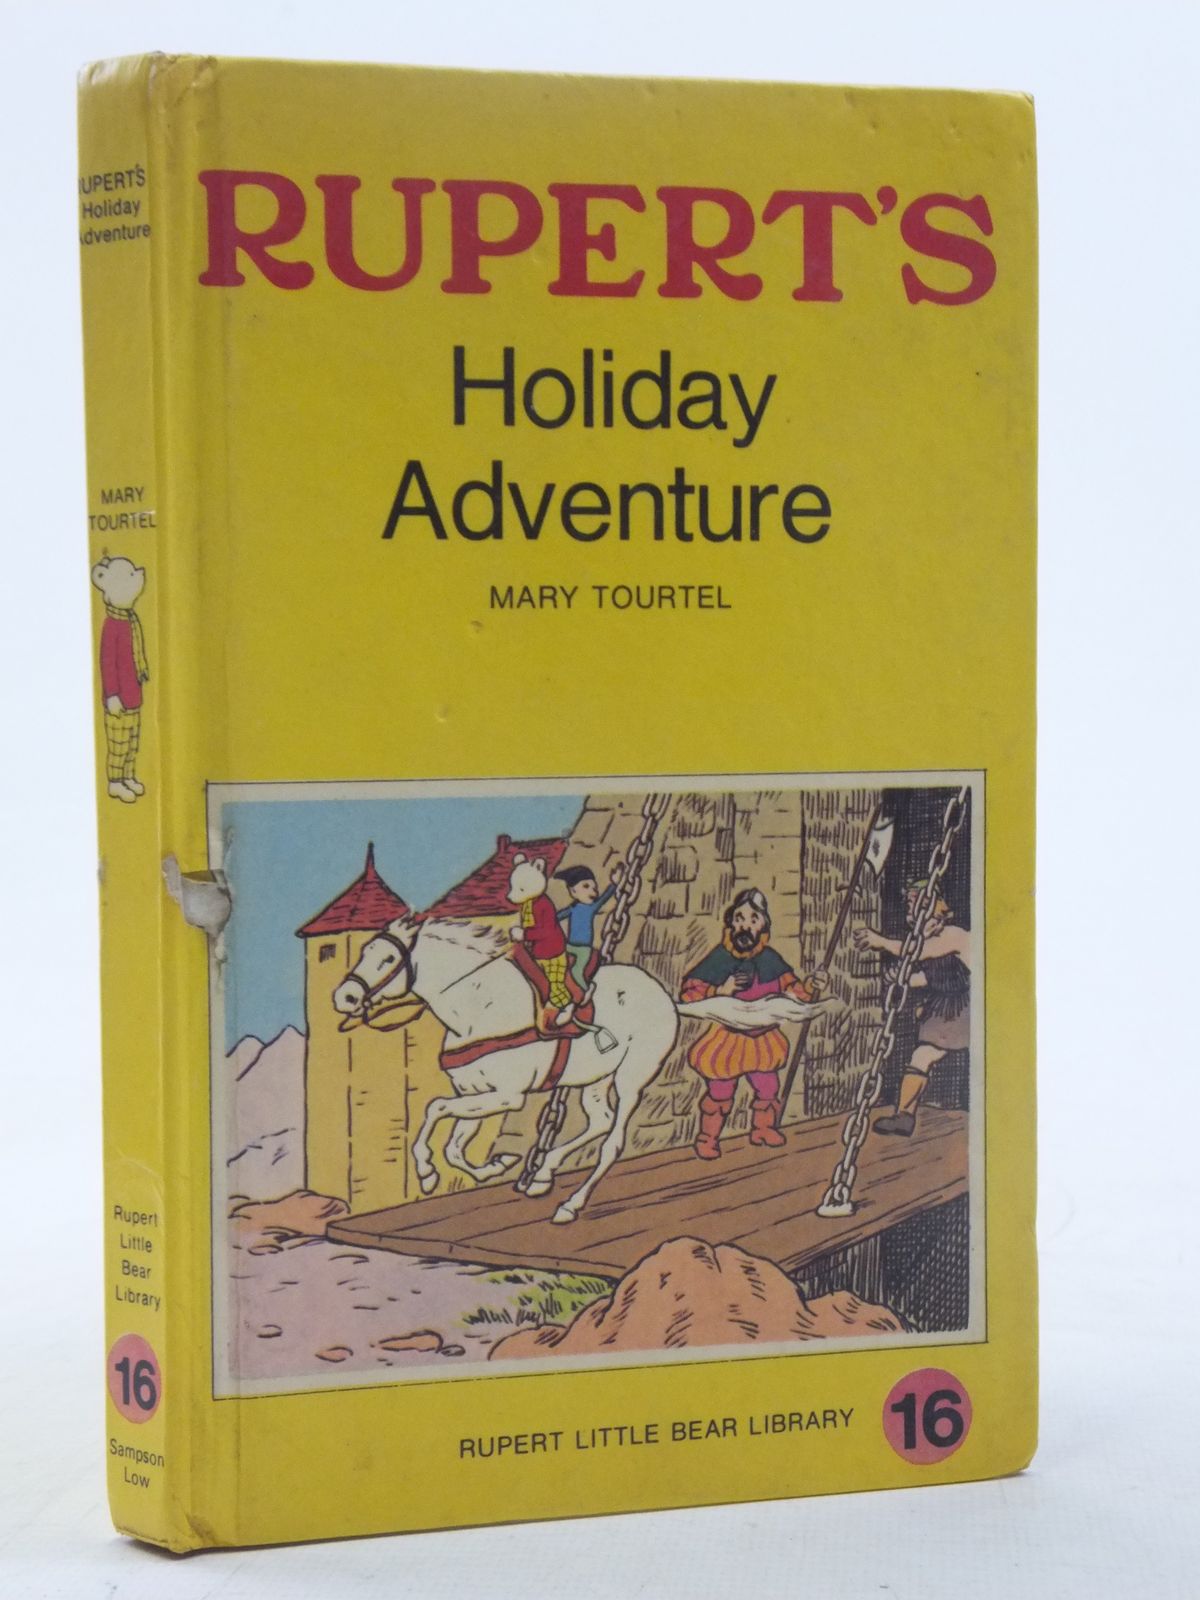 TOURTEL, MARY ILLUSTRATED BY TOURTEL, MARY - Rupert's Holiday Adventure - Rupert Little Bear Library No. 16 (Woolworth)